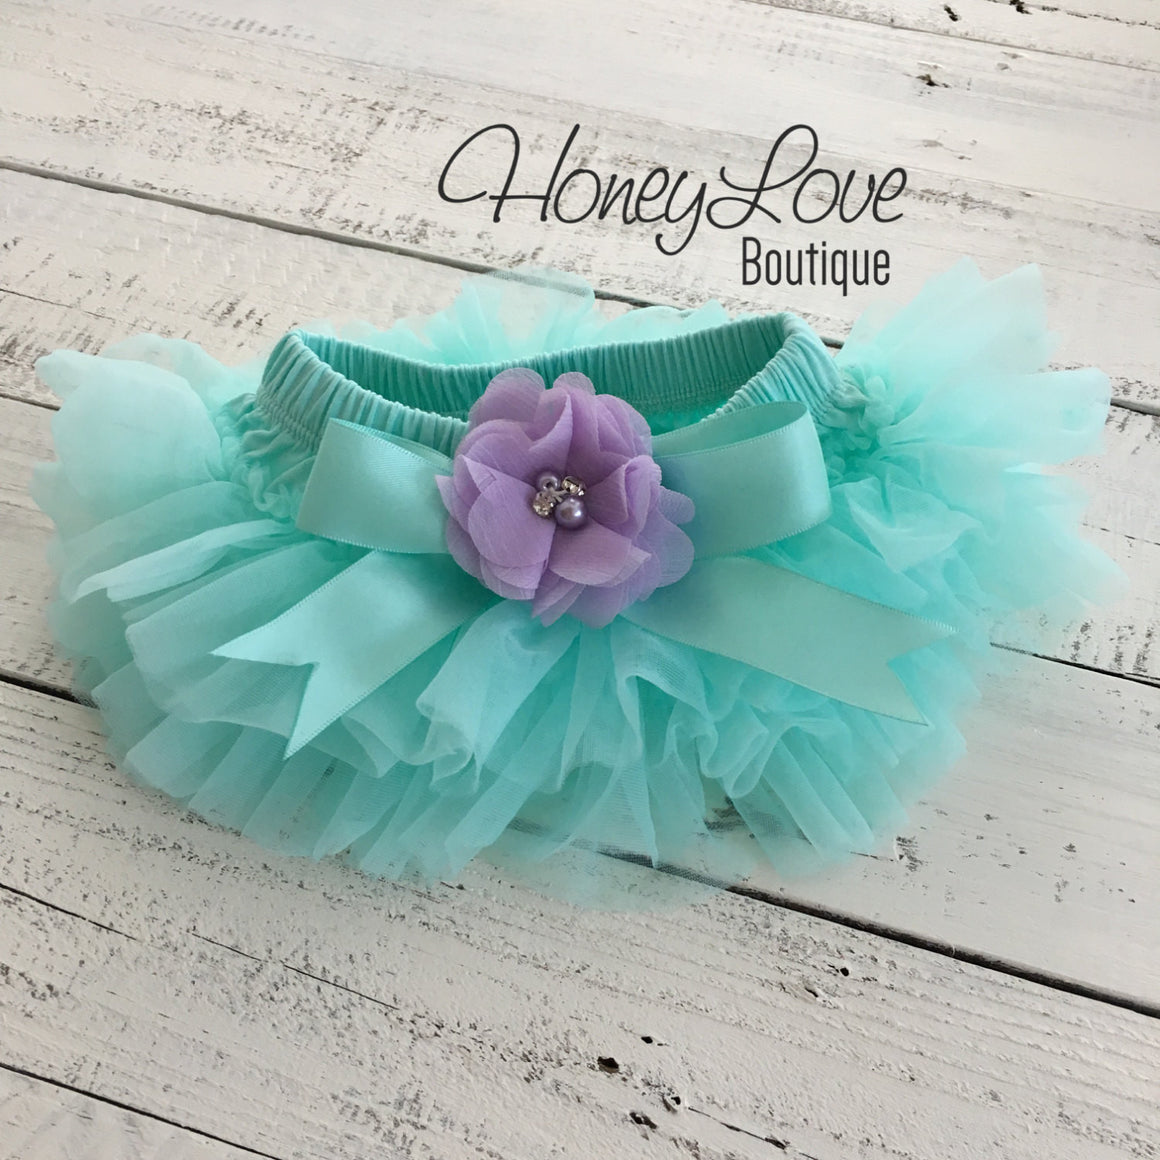 PERSONALIZED Name Outfit - Mint/Aqua and Gold Glitter - Lavender Purple flower embellished tutu skirt bloomers - HoneyLoveBoutique